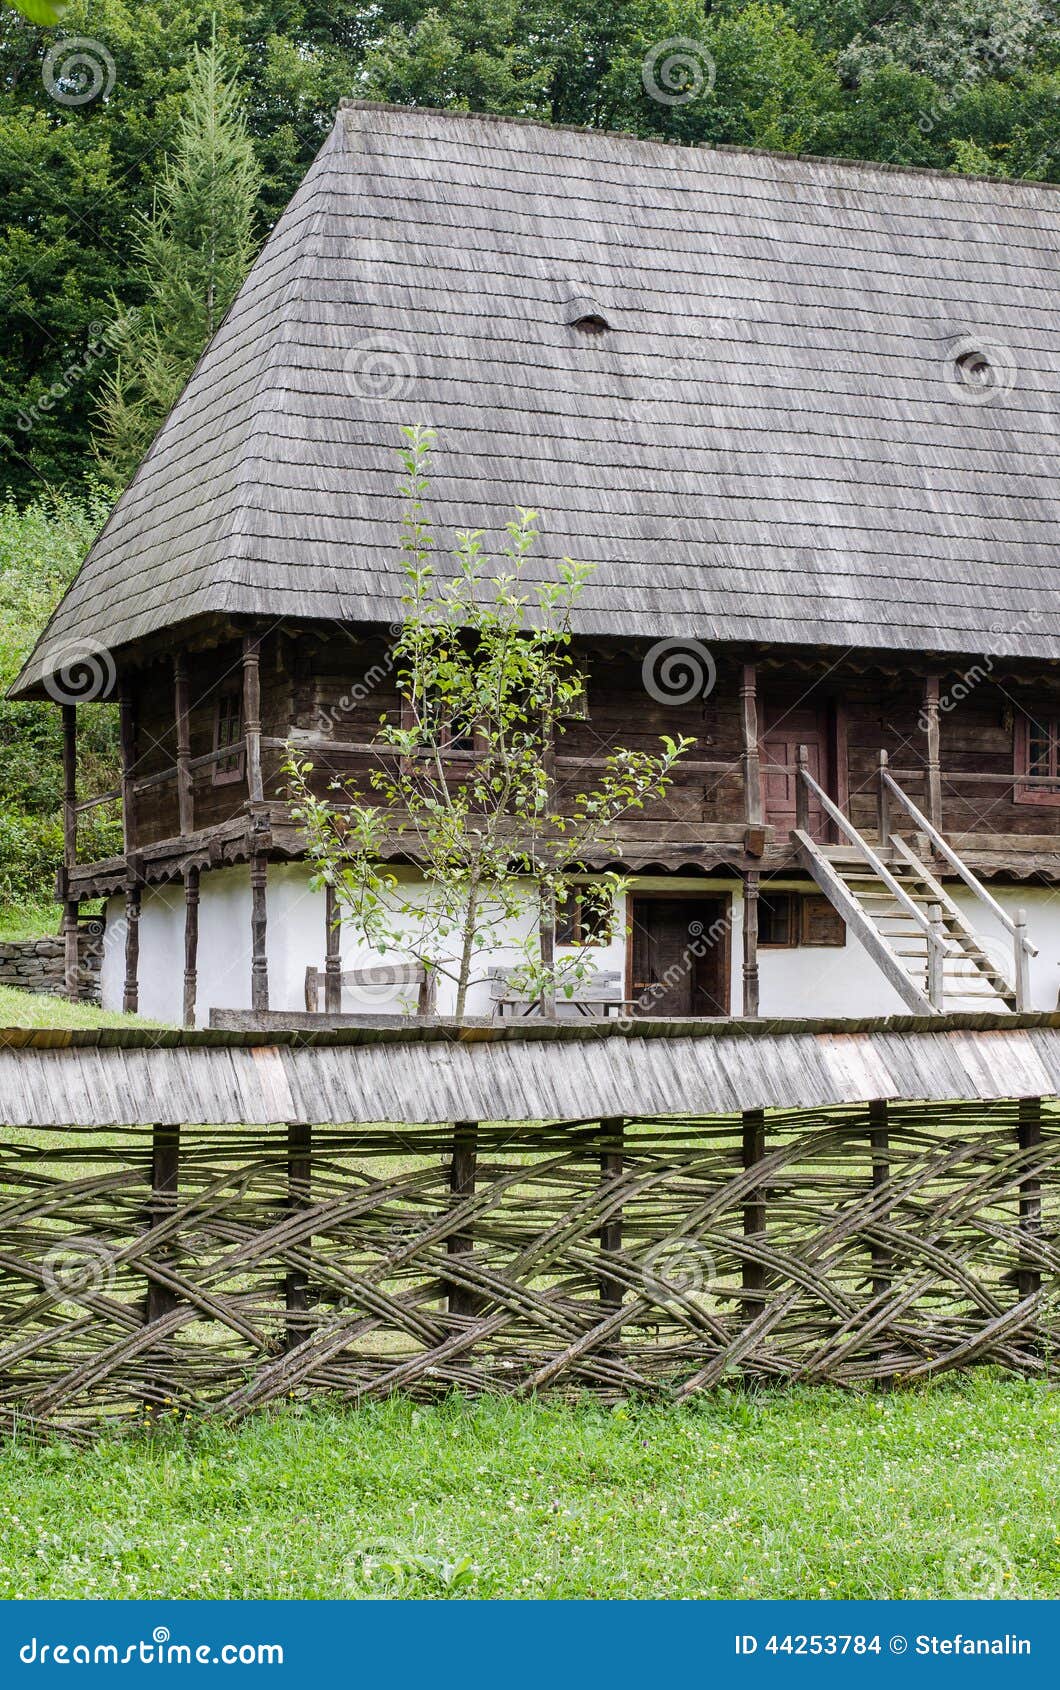 national astra museum in sibiu - old house vegetal fence